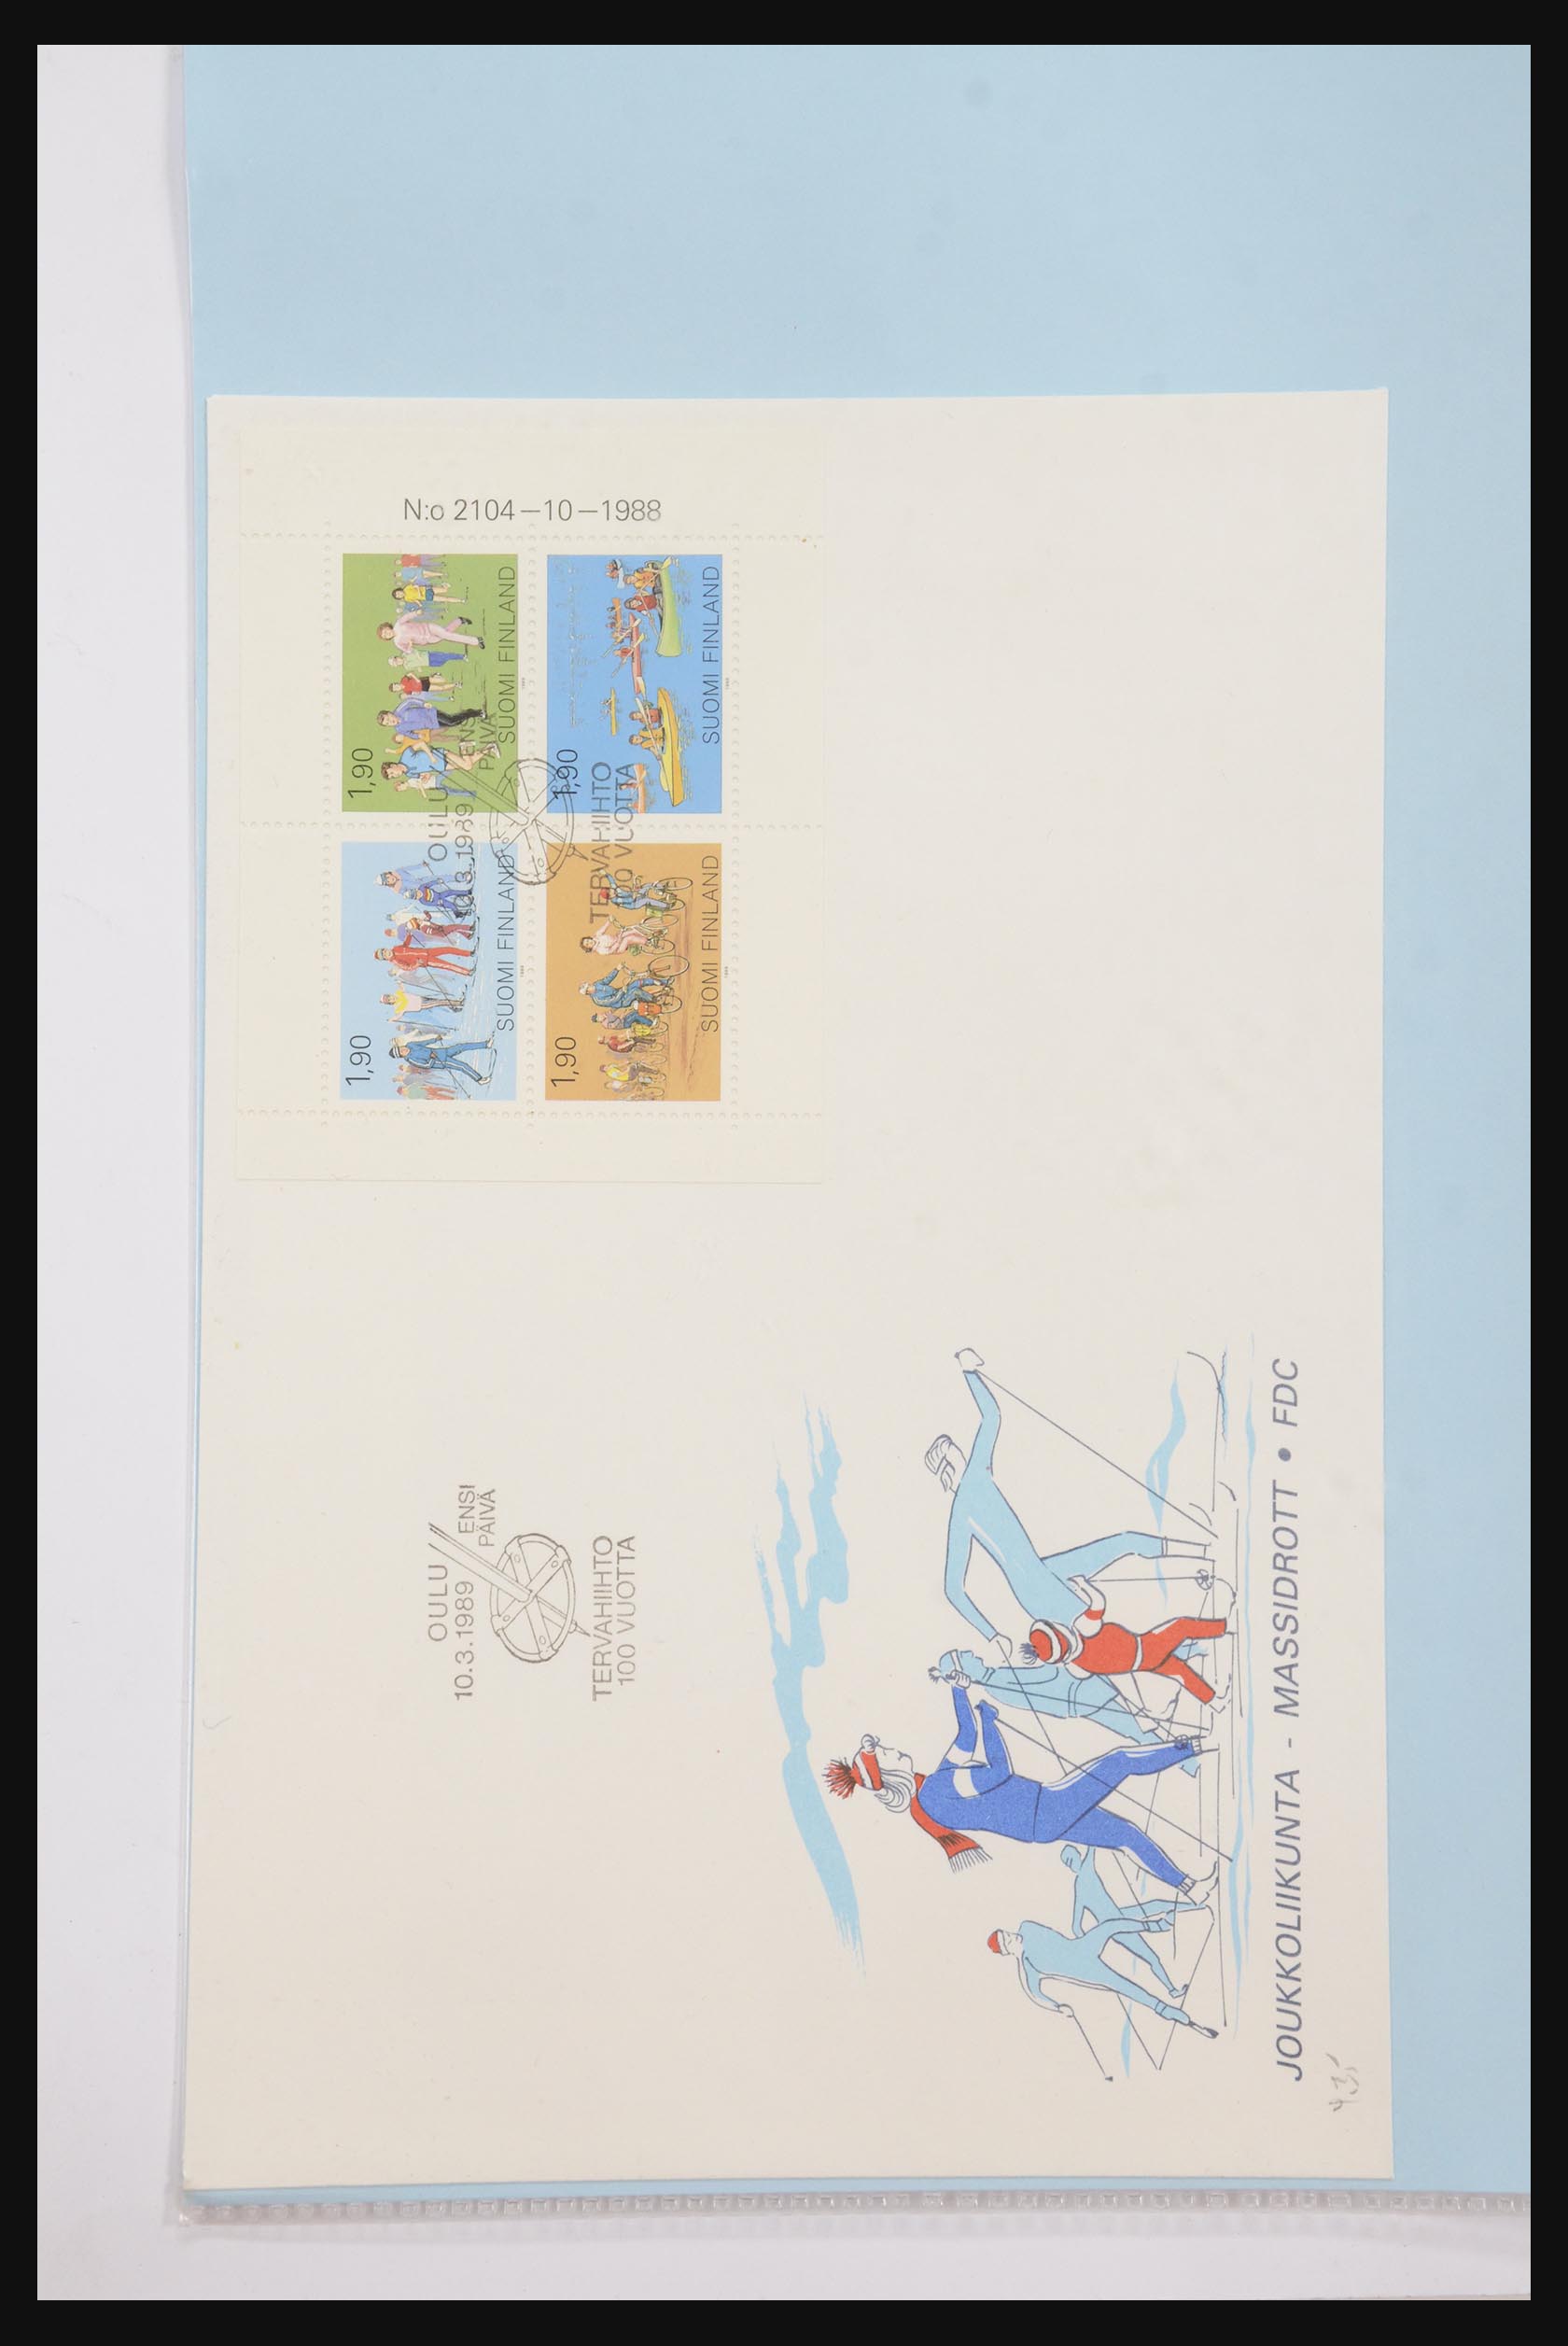 31915 002 - 31915 Western Europe souvenir sheets and stamp booklets on FDC.